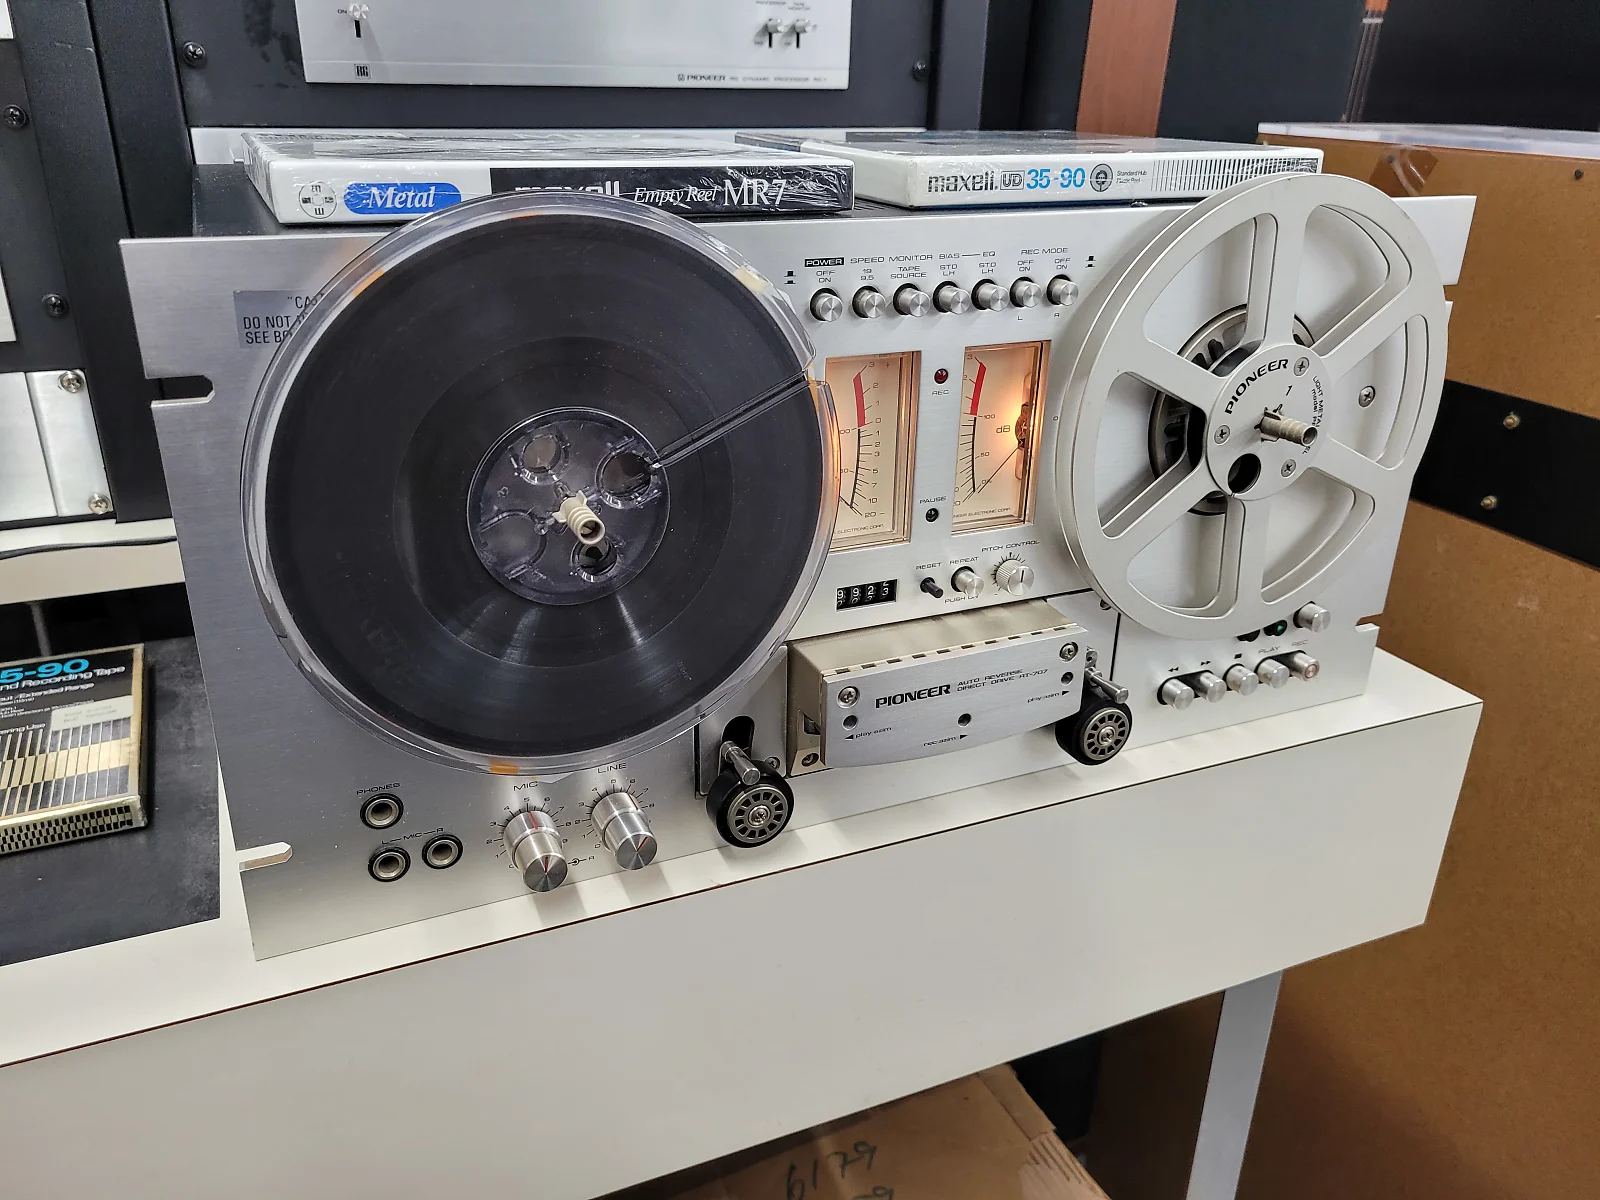 Maxell 35-90 UD Reel-to-Reel Sound Recording Media